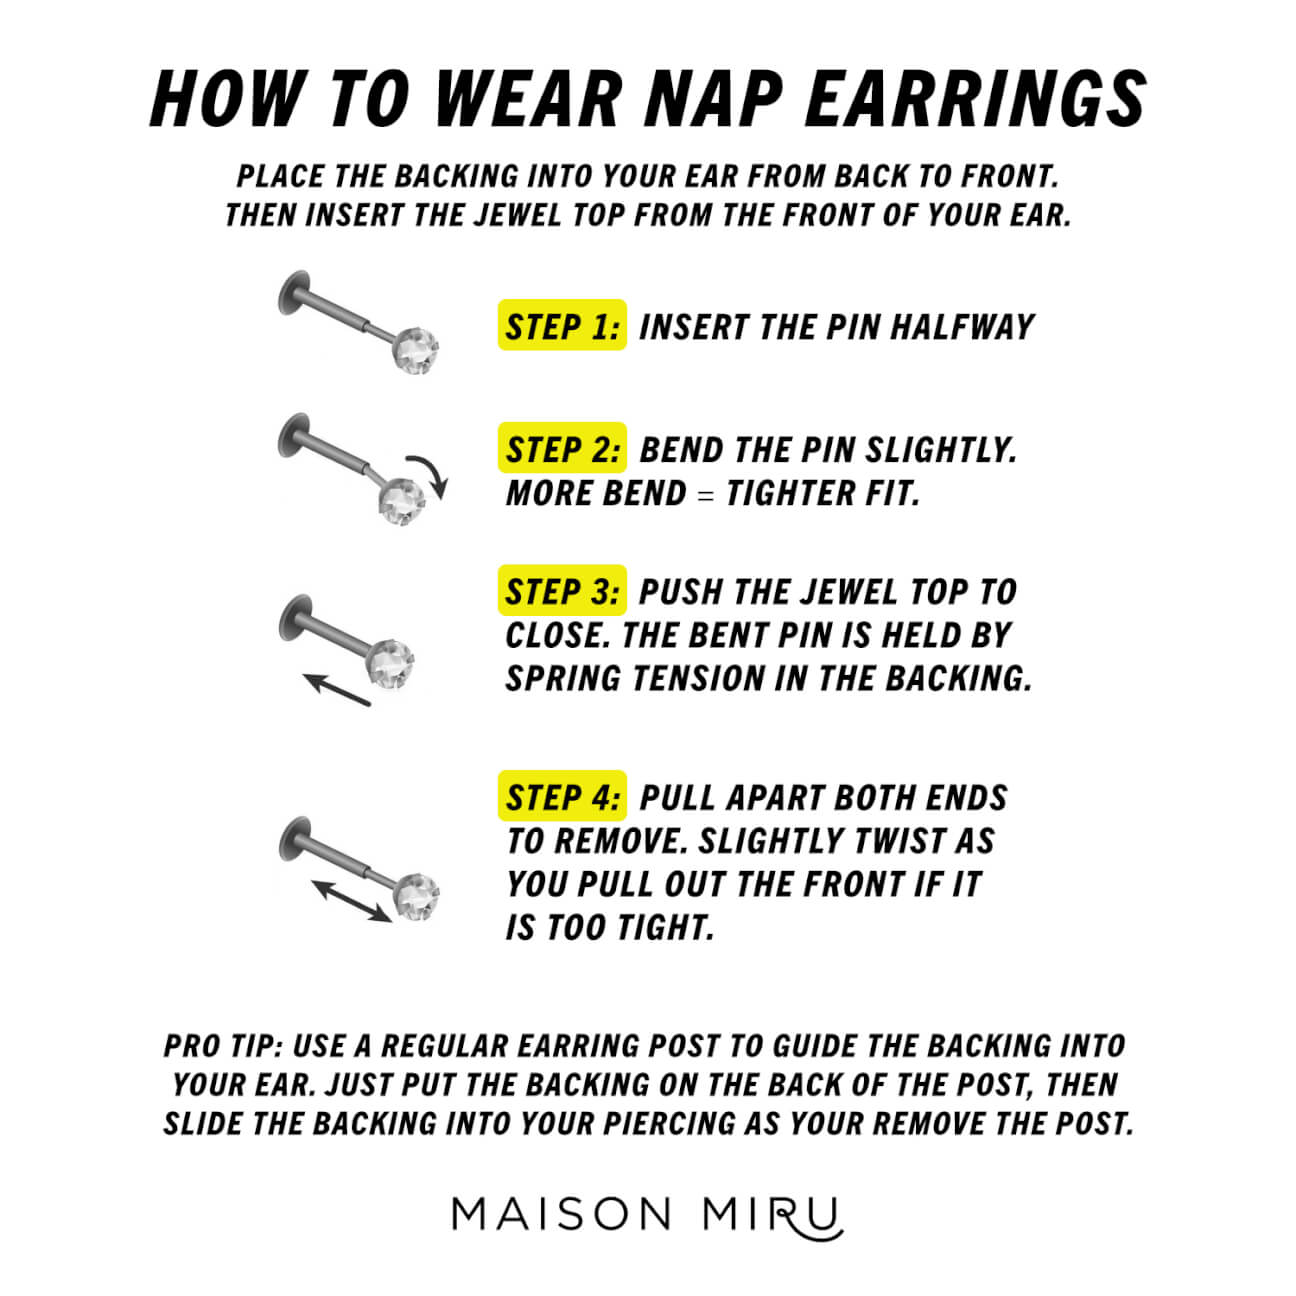 How to Wear the Classic Heart Nap Earrings